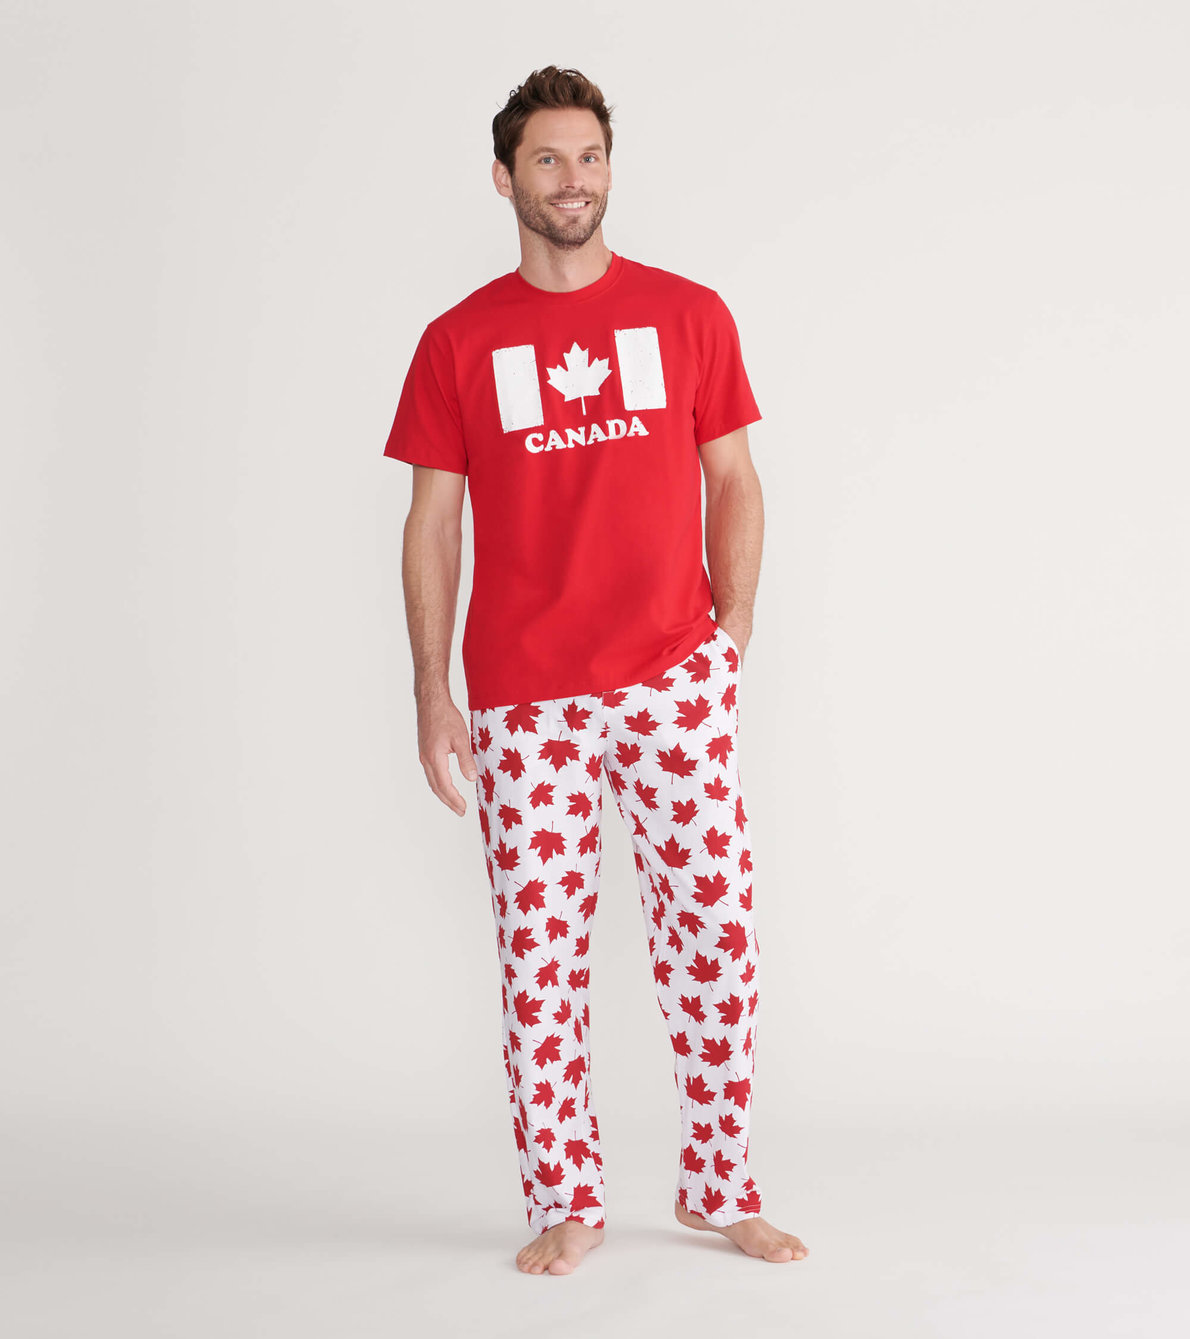 View larger image of Made in Canada Men's Tee and Pajama Separates